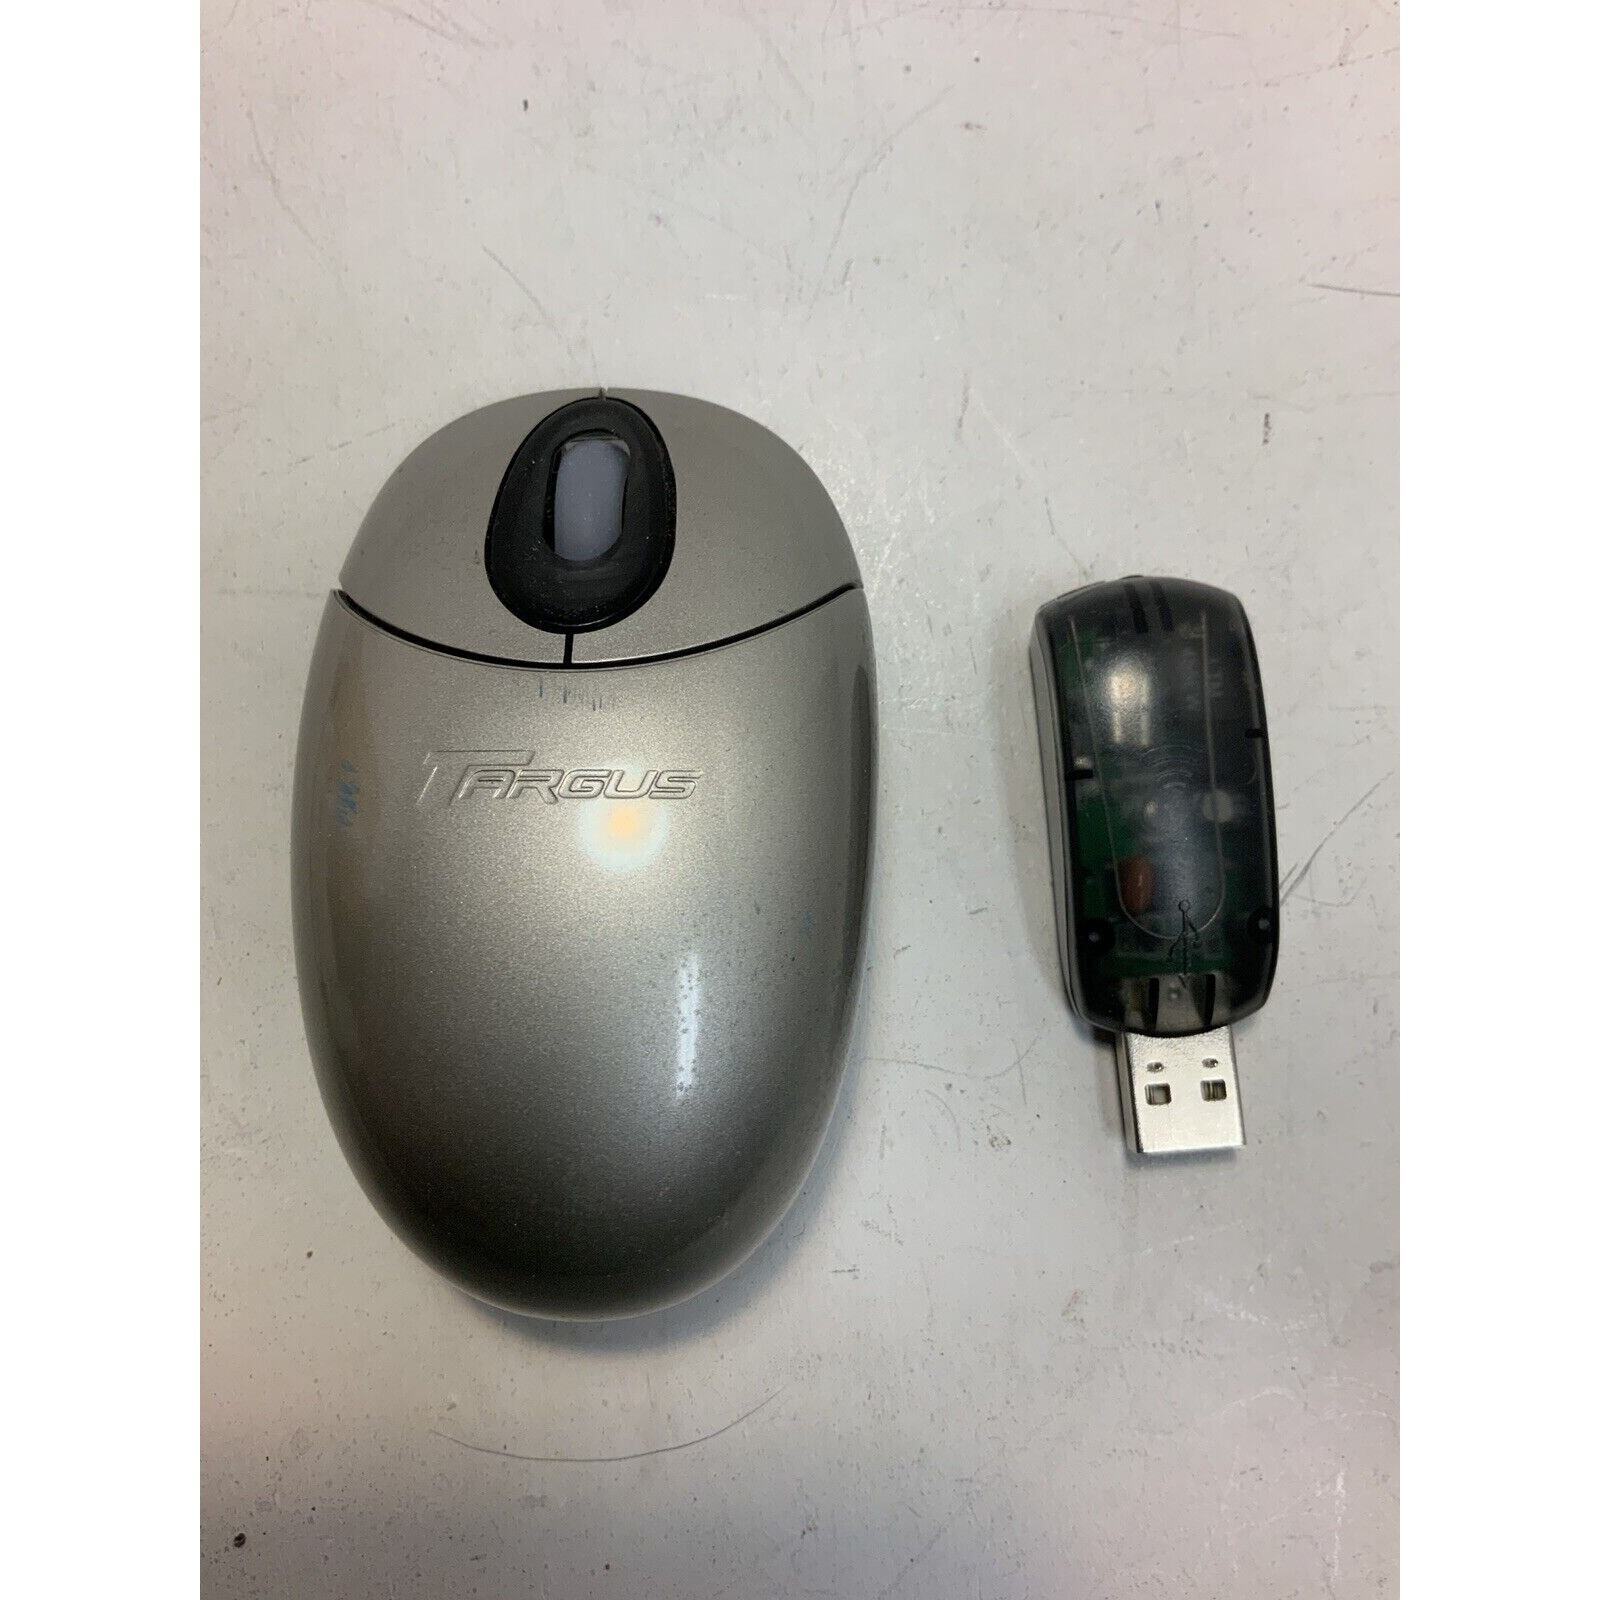 Targus Wirelss Optical Wheel Mouse With USB Dongle Model PAUM005V2